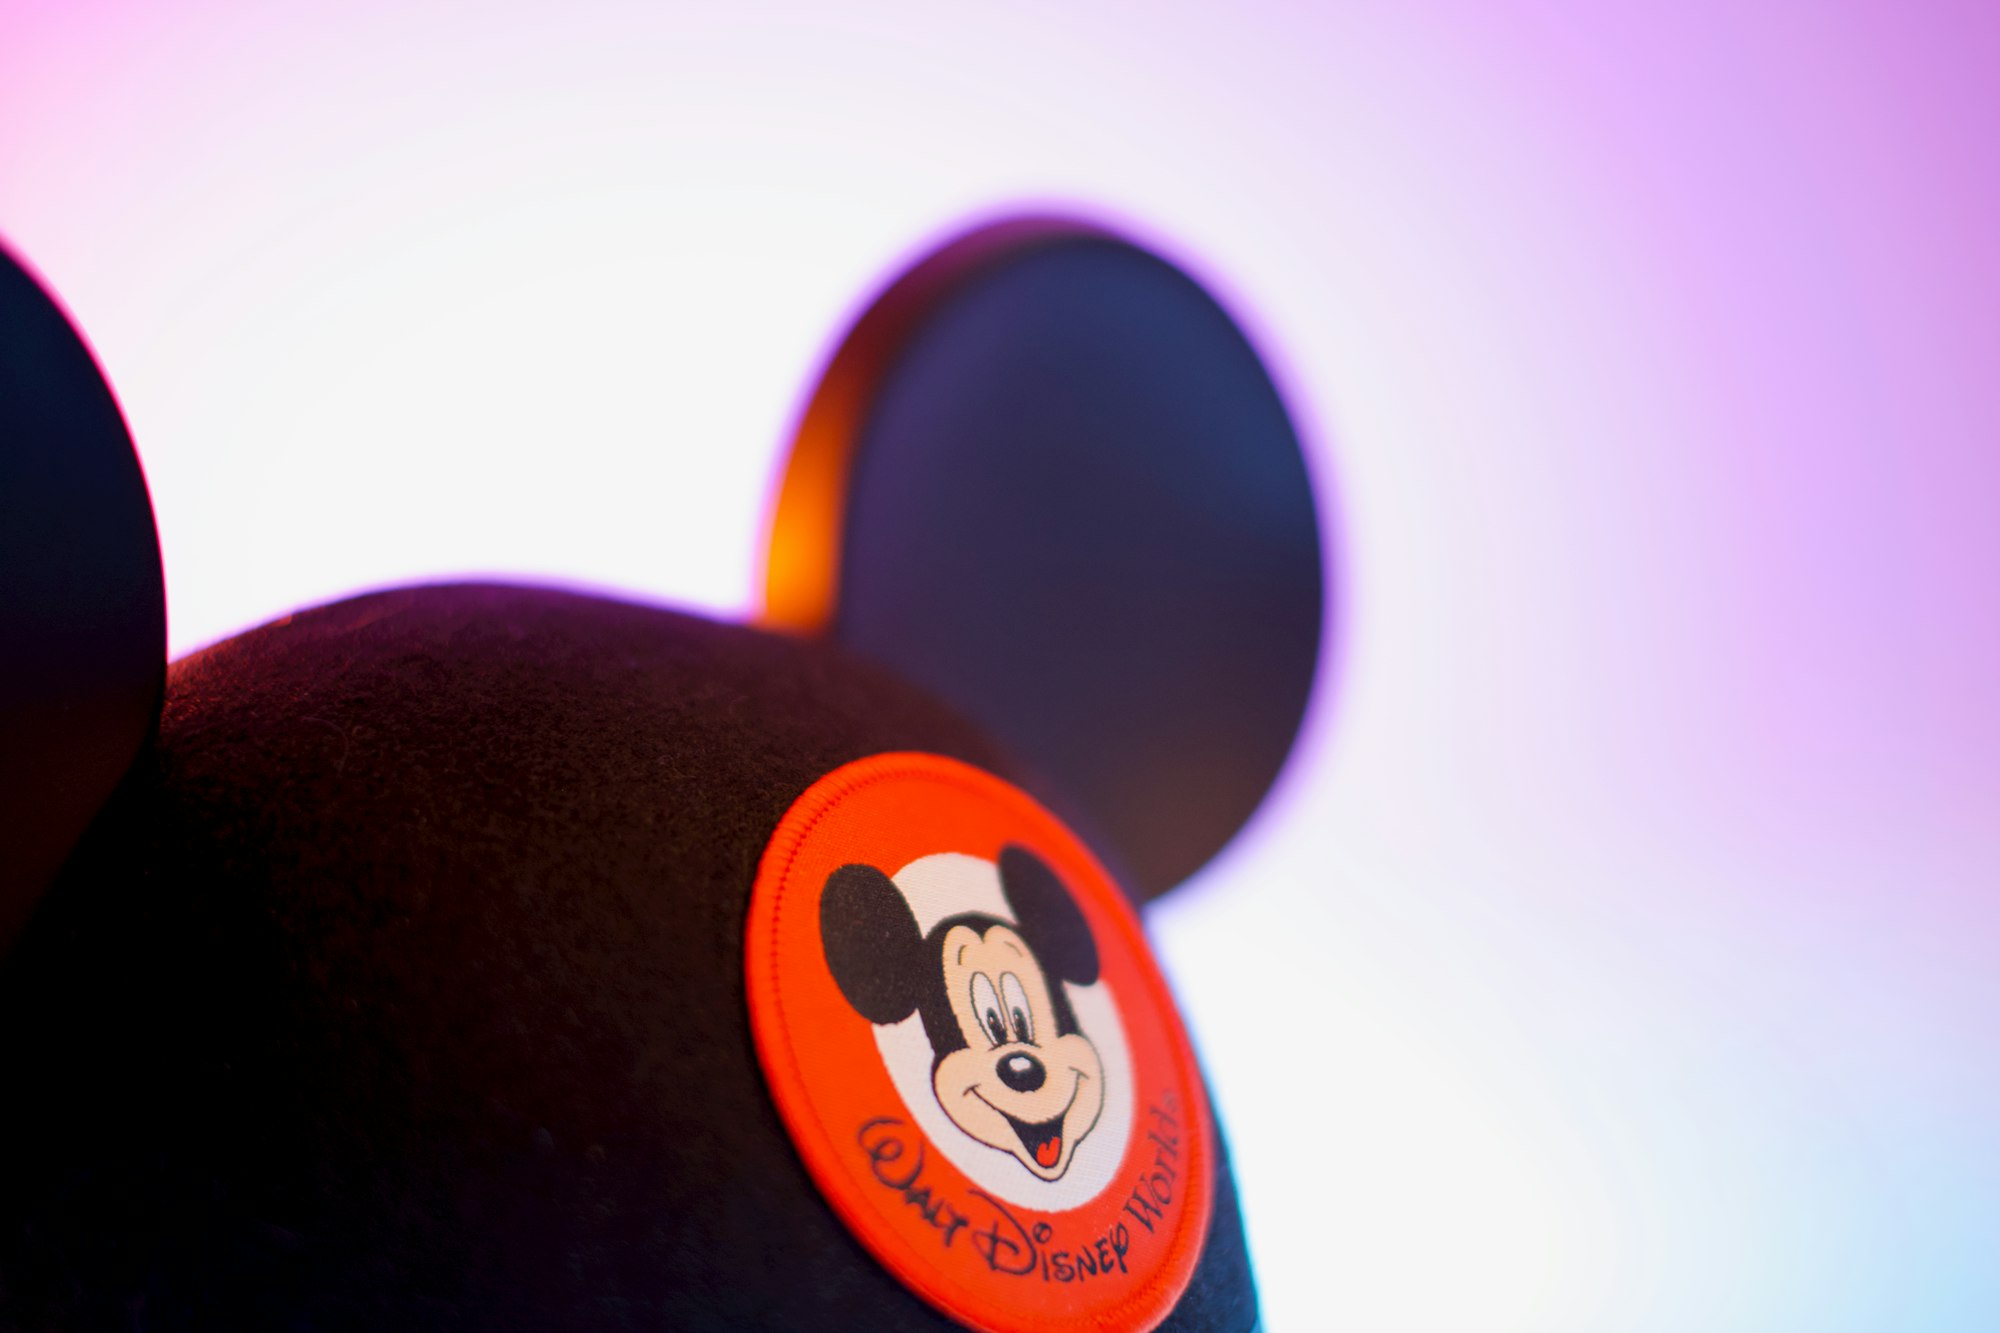 🐭 Disney is now thinking as a tech platform